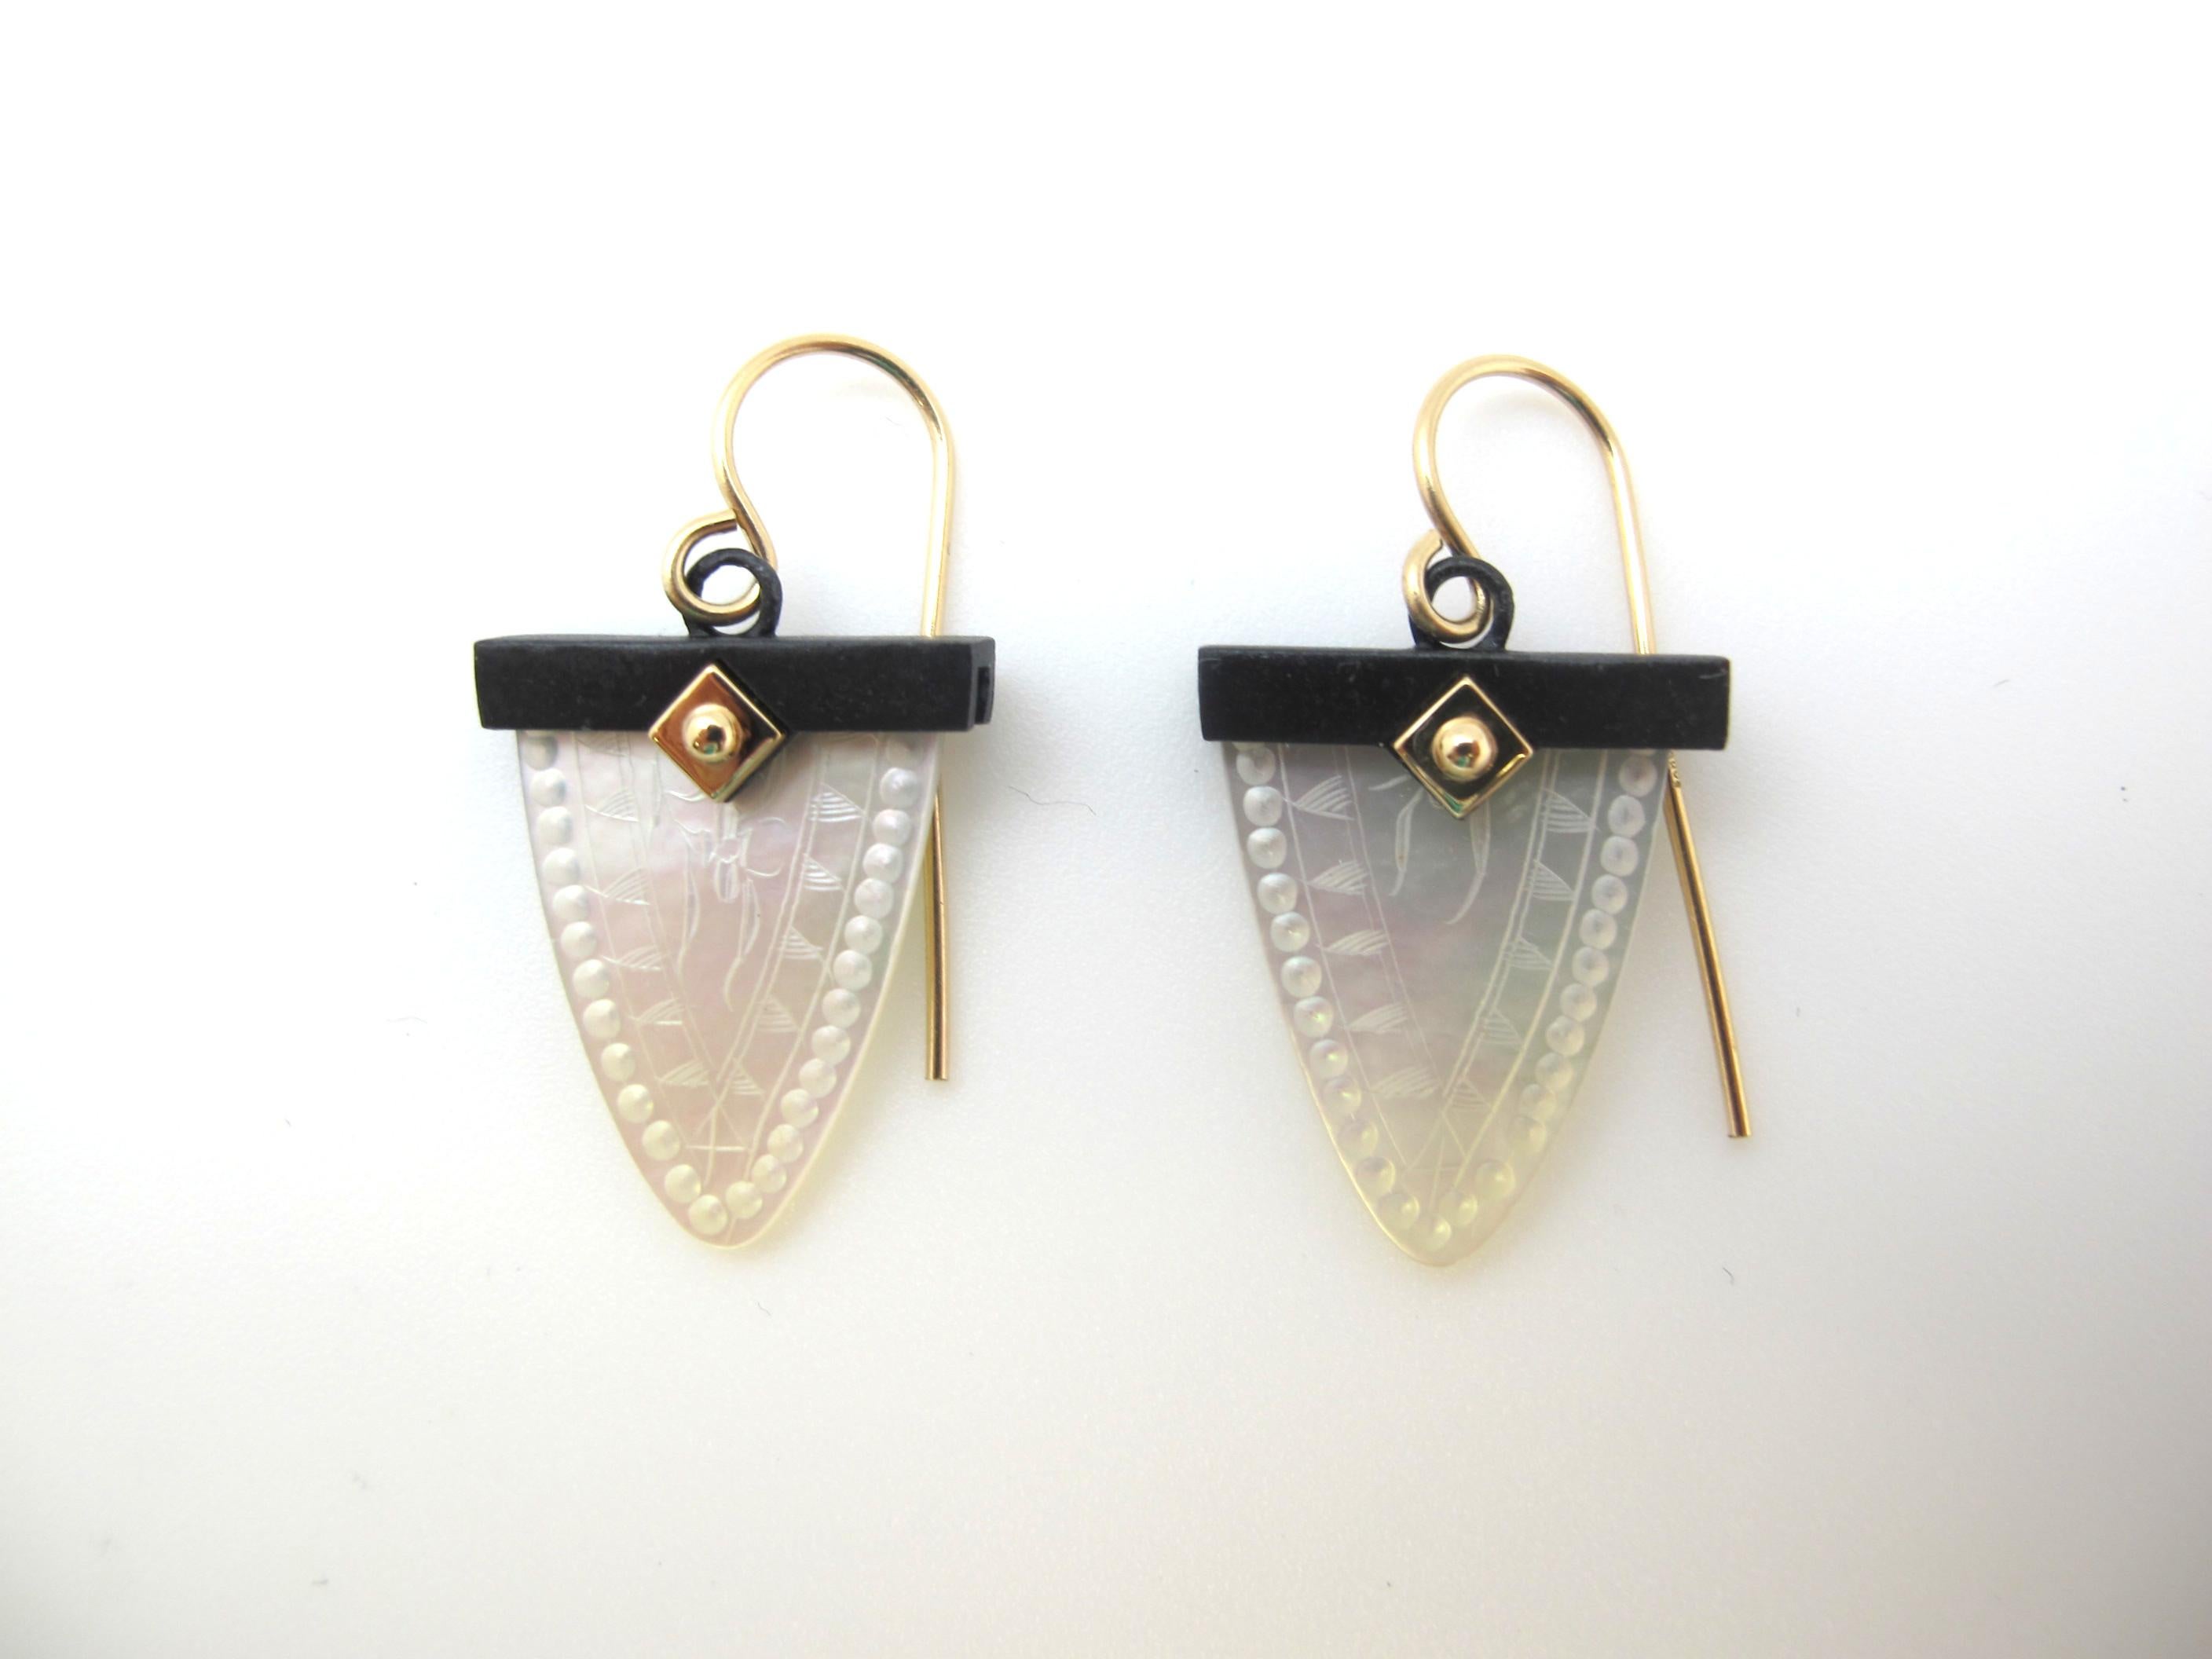 Artisan Mother-of-Pearl Gaming Counter, 18k Yellow Gold, Blackened Silver Drop Earrings